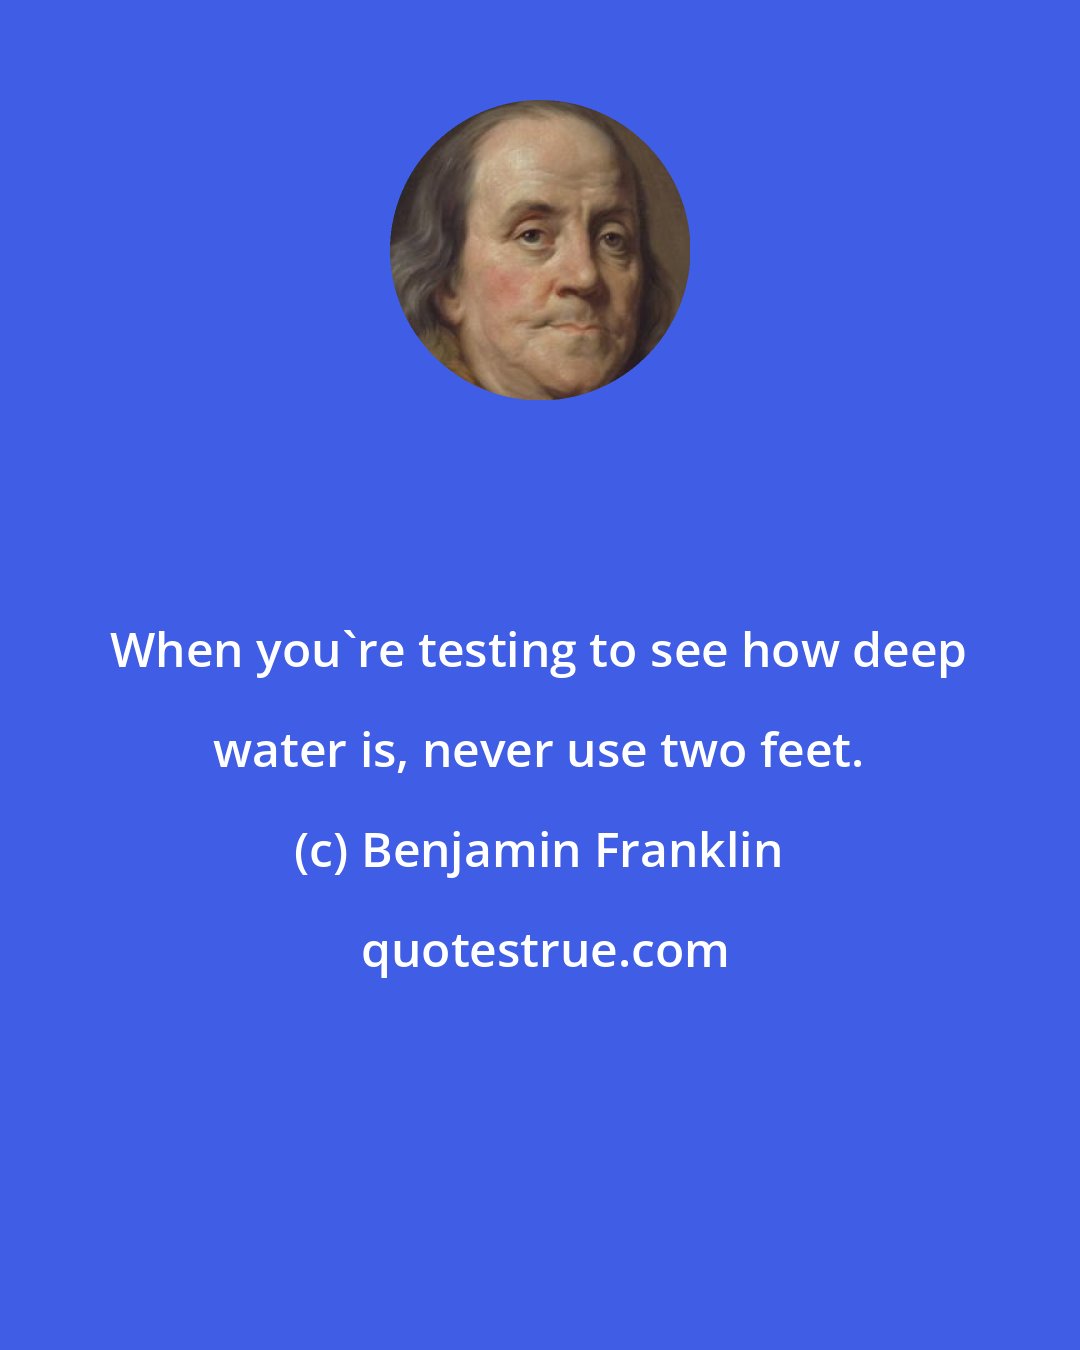 Benjamin Franklin: When you're testing to see how deep water is, never use two feet.